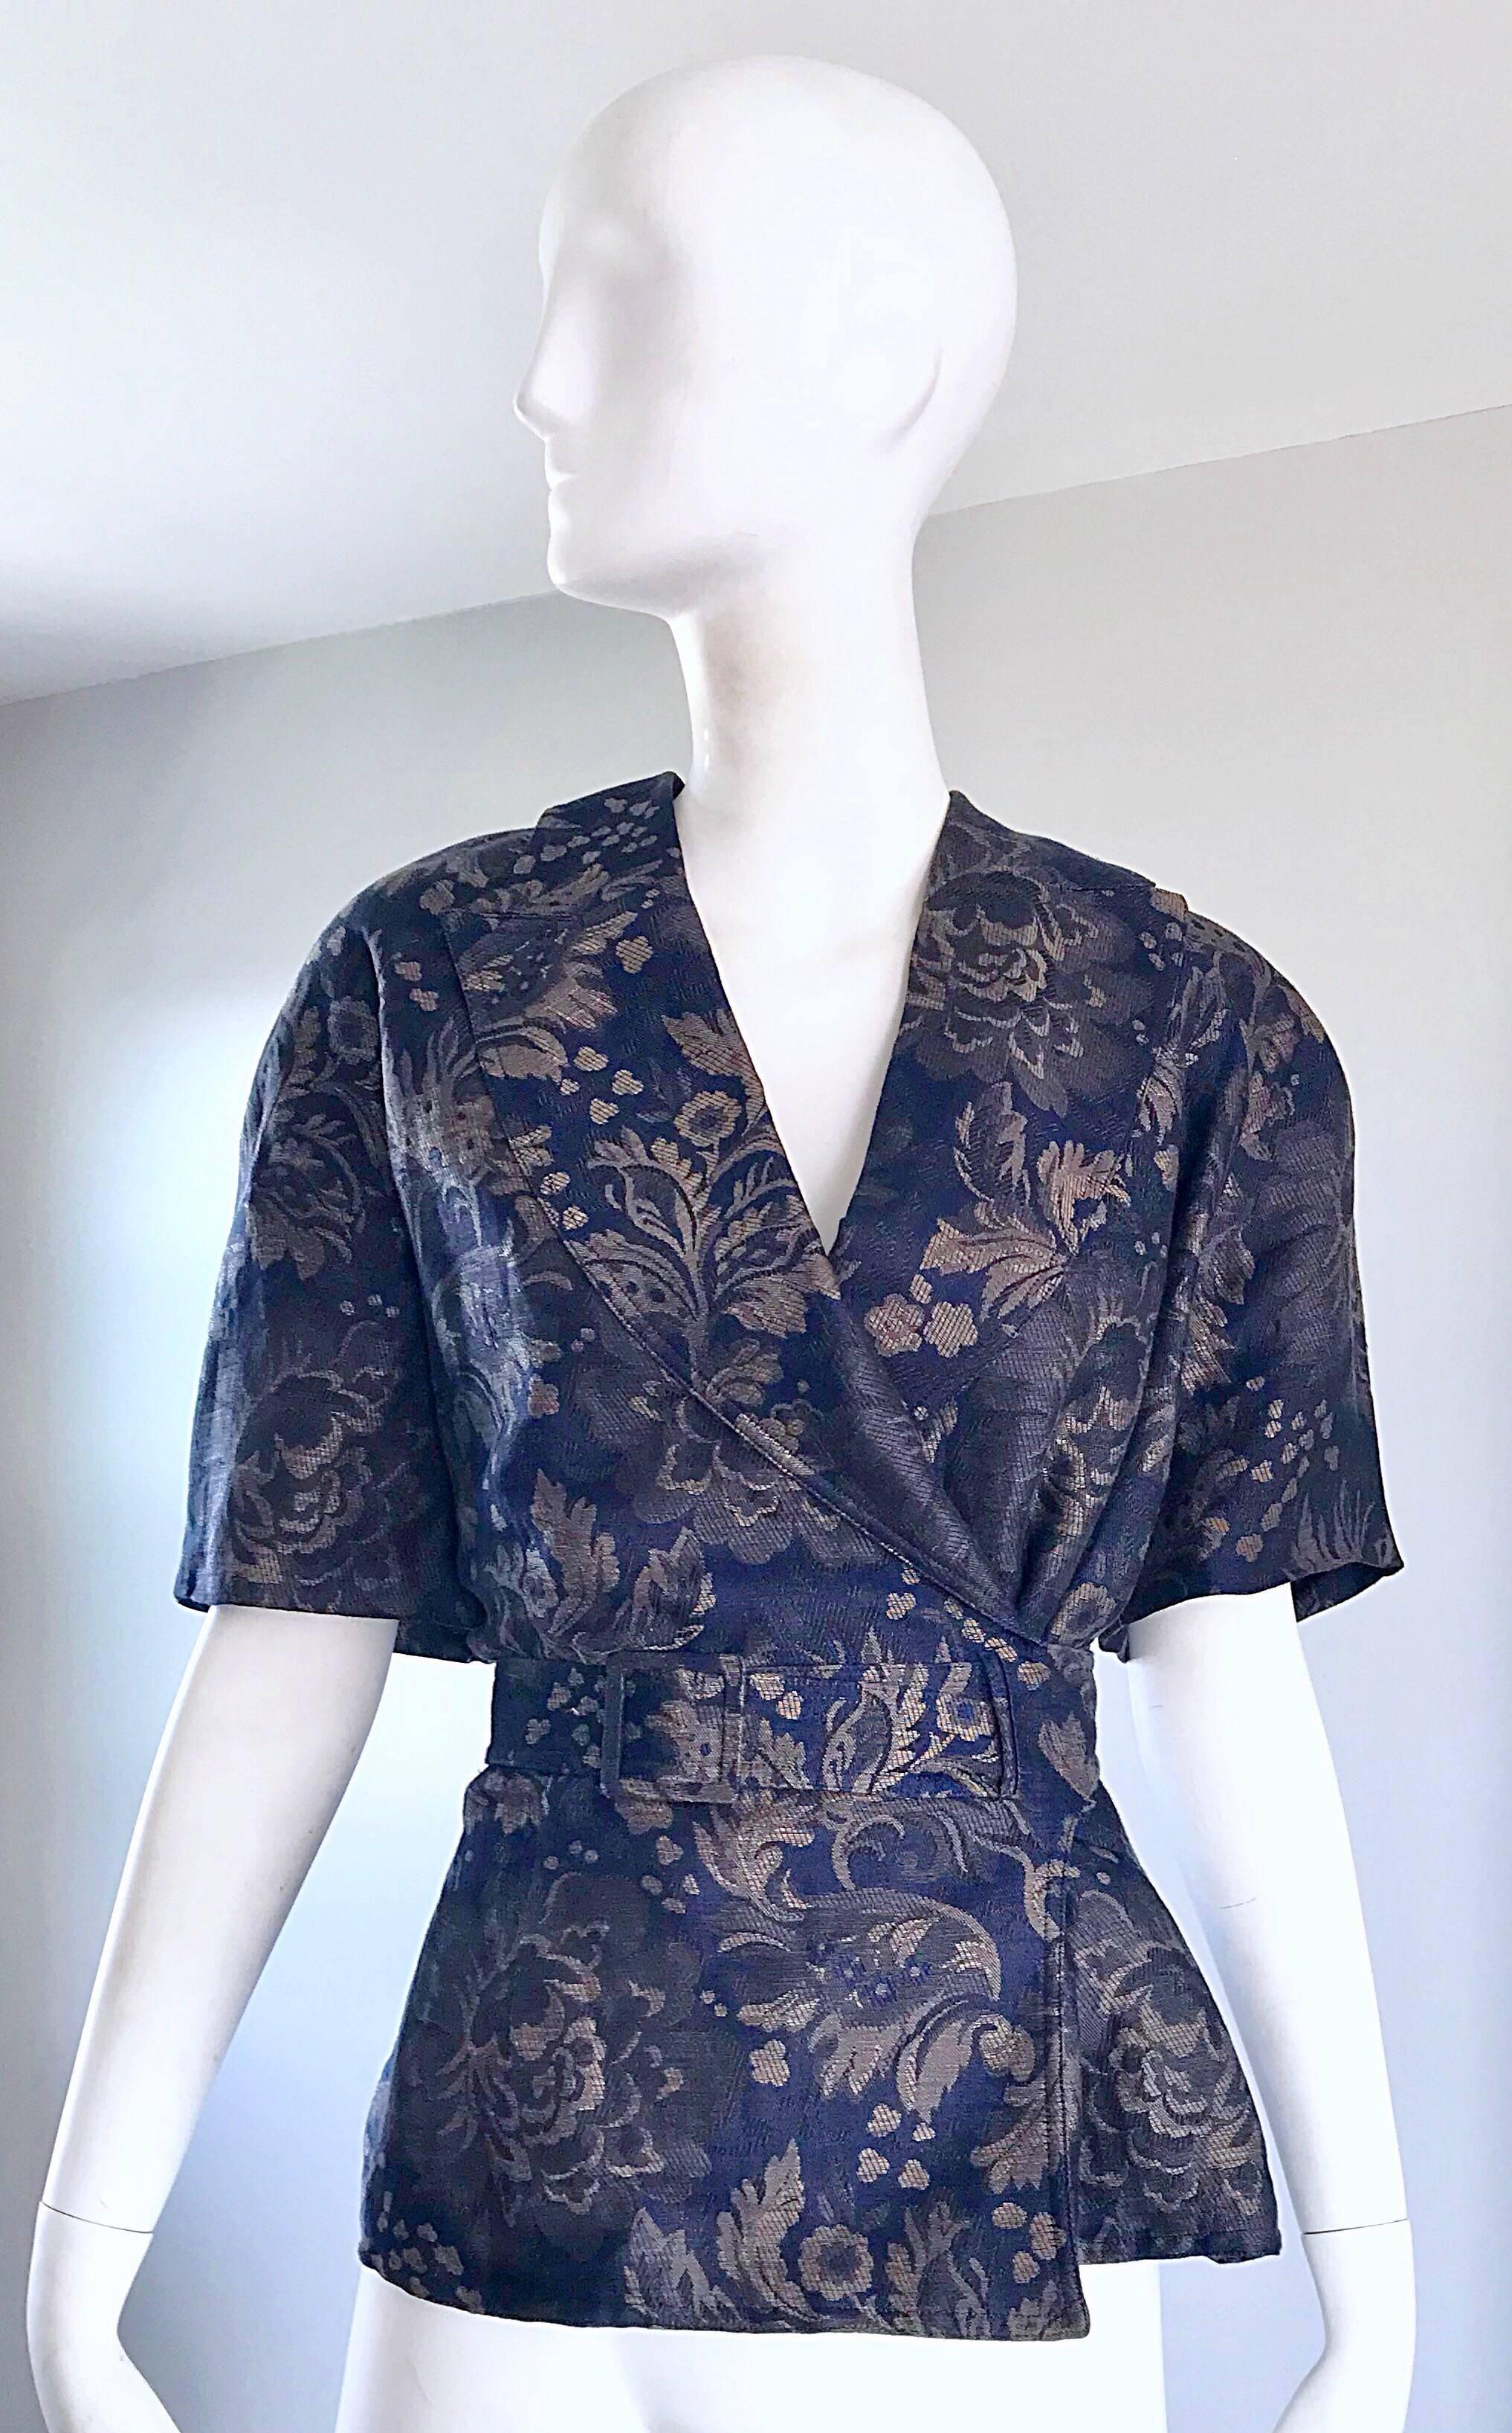 Rare 80s vintage GUCCI navy blue and taupe short sleeve belted kimono style jacket / top! Features a rich navy blue color, with taupe floral pattern. Attached belt wraps around and loops through a slit on the side. Interior buttons to ensure